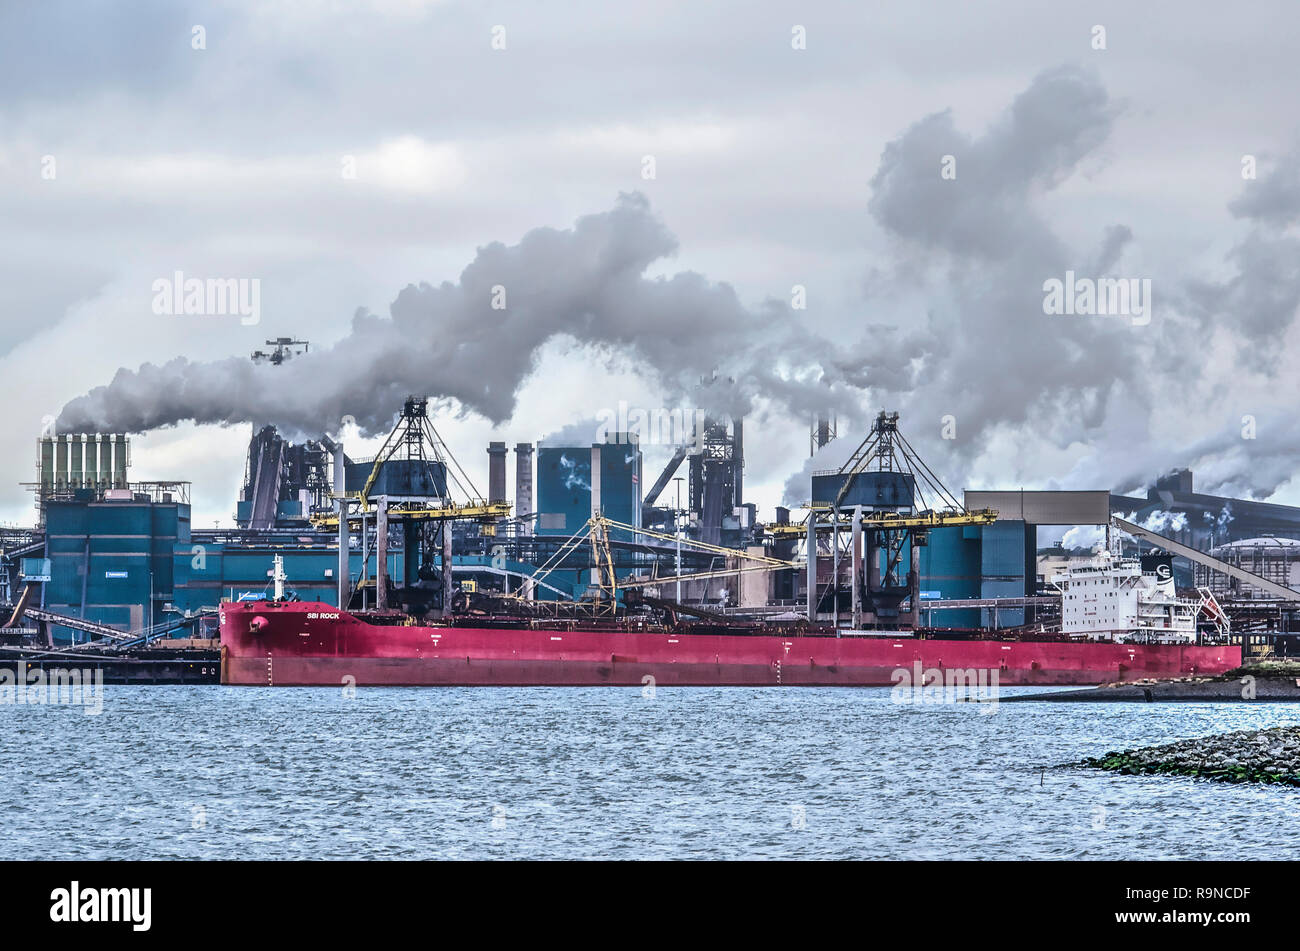 IJmuiden, The Netherlands, December 22, 2018: smoking chimneys and a red bulk carrier moored at the Tata steelworks on the opposite side of the Norths Stock Photo